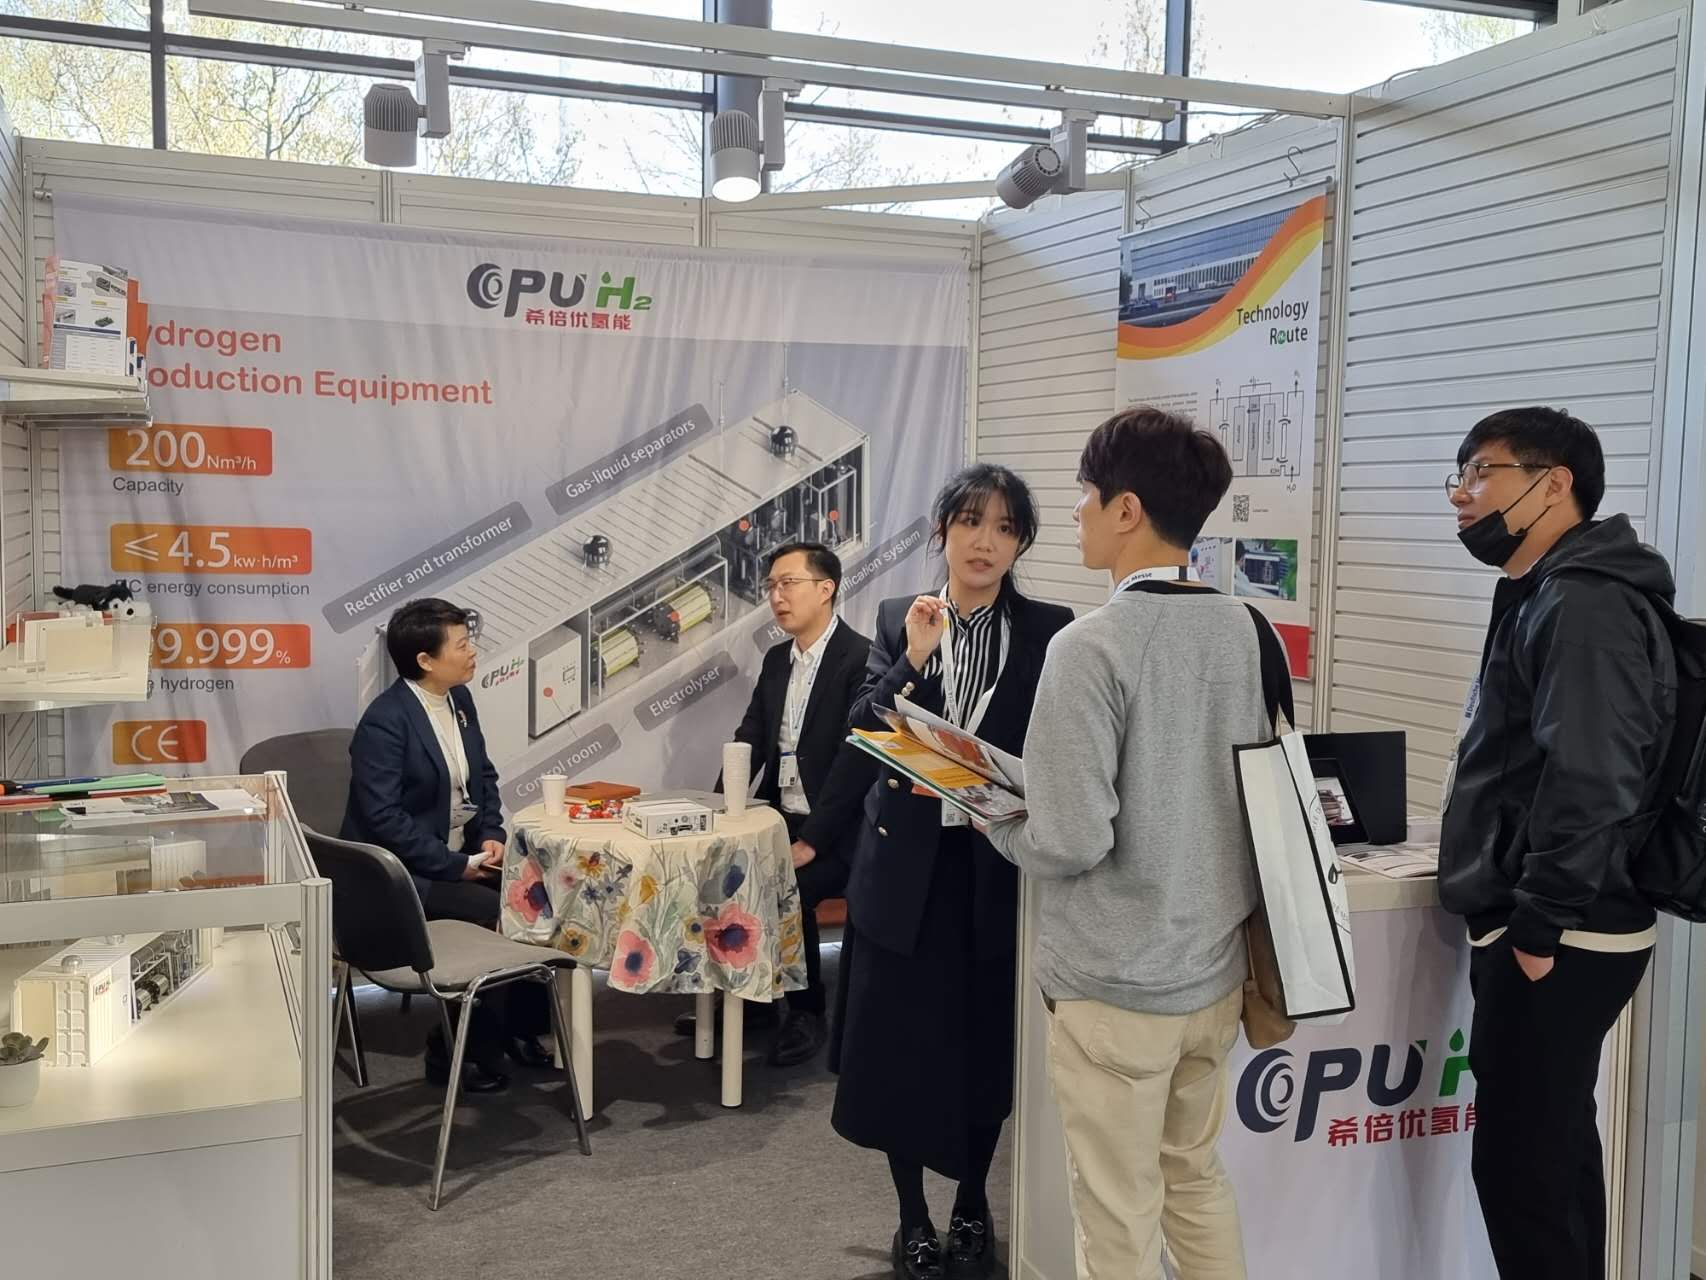 On site direct attack | CPUH2 makes an exciting appearance in Hannover, Germany, looking forward to meeting you!